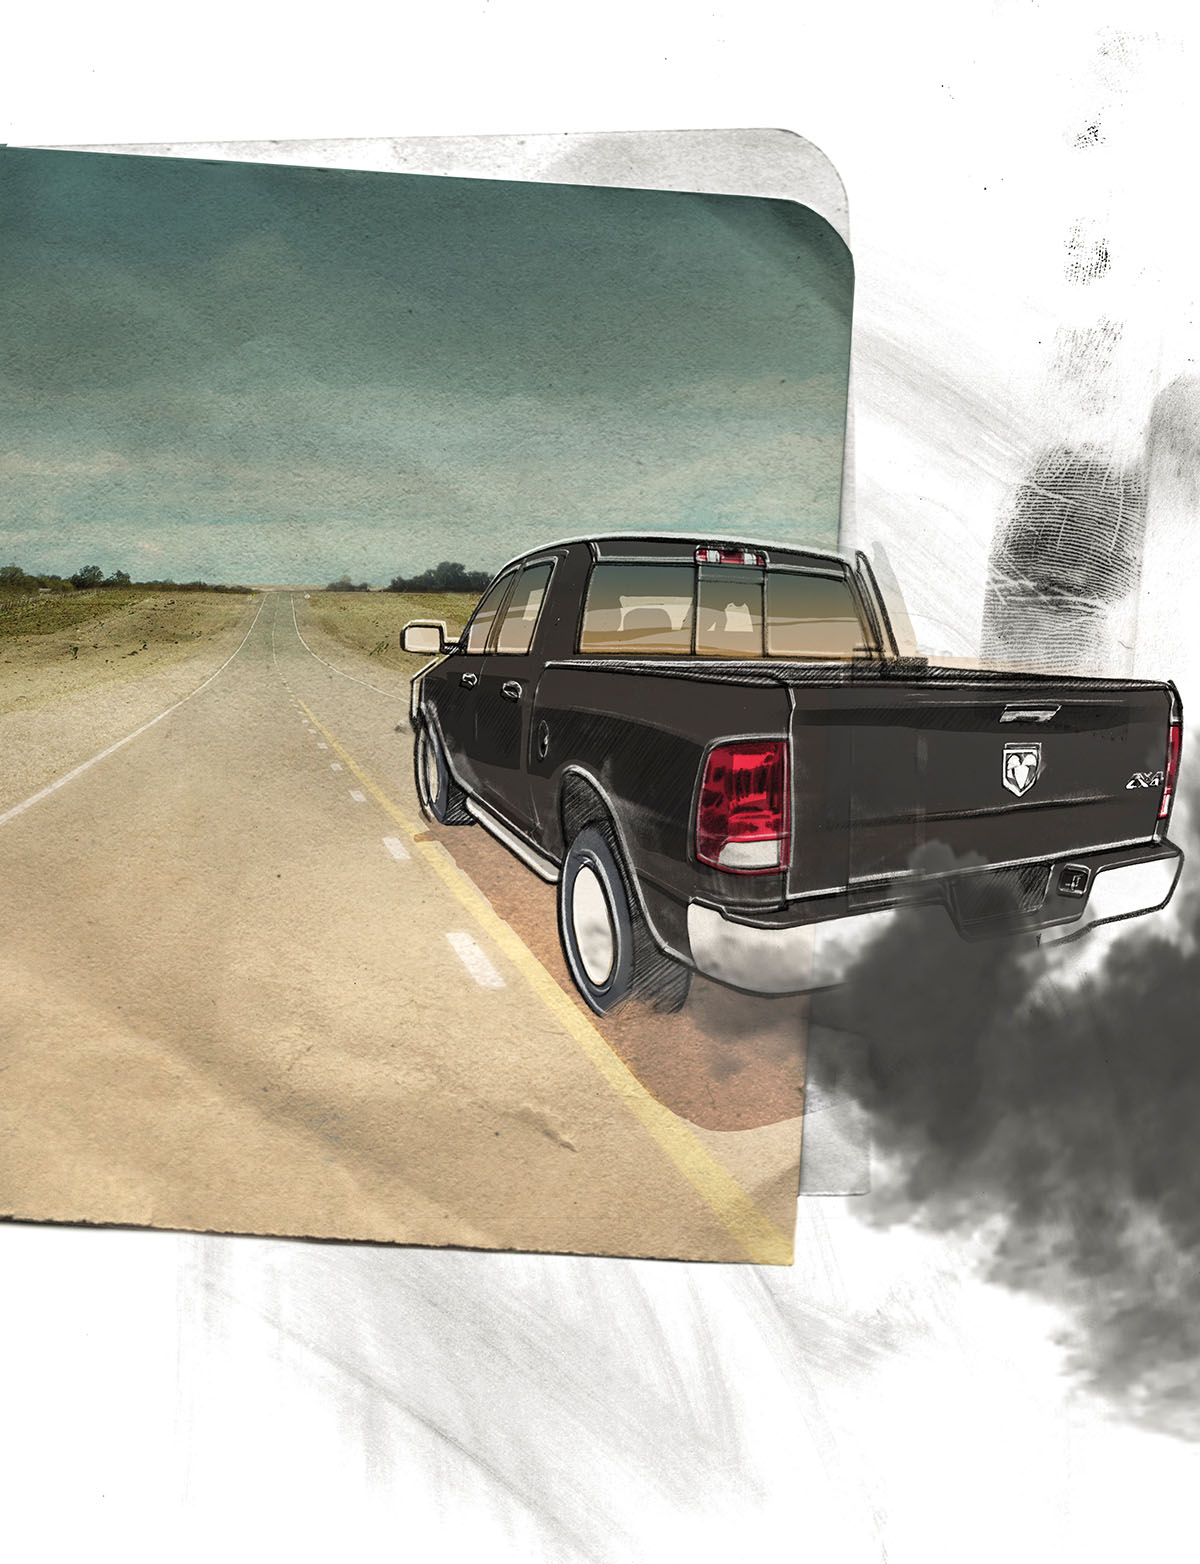 An illustration of a black Dodge truck driving on a highway with a cloud of black exhaust